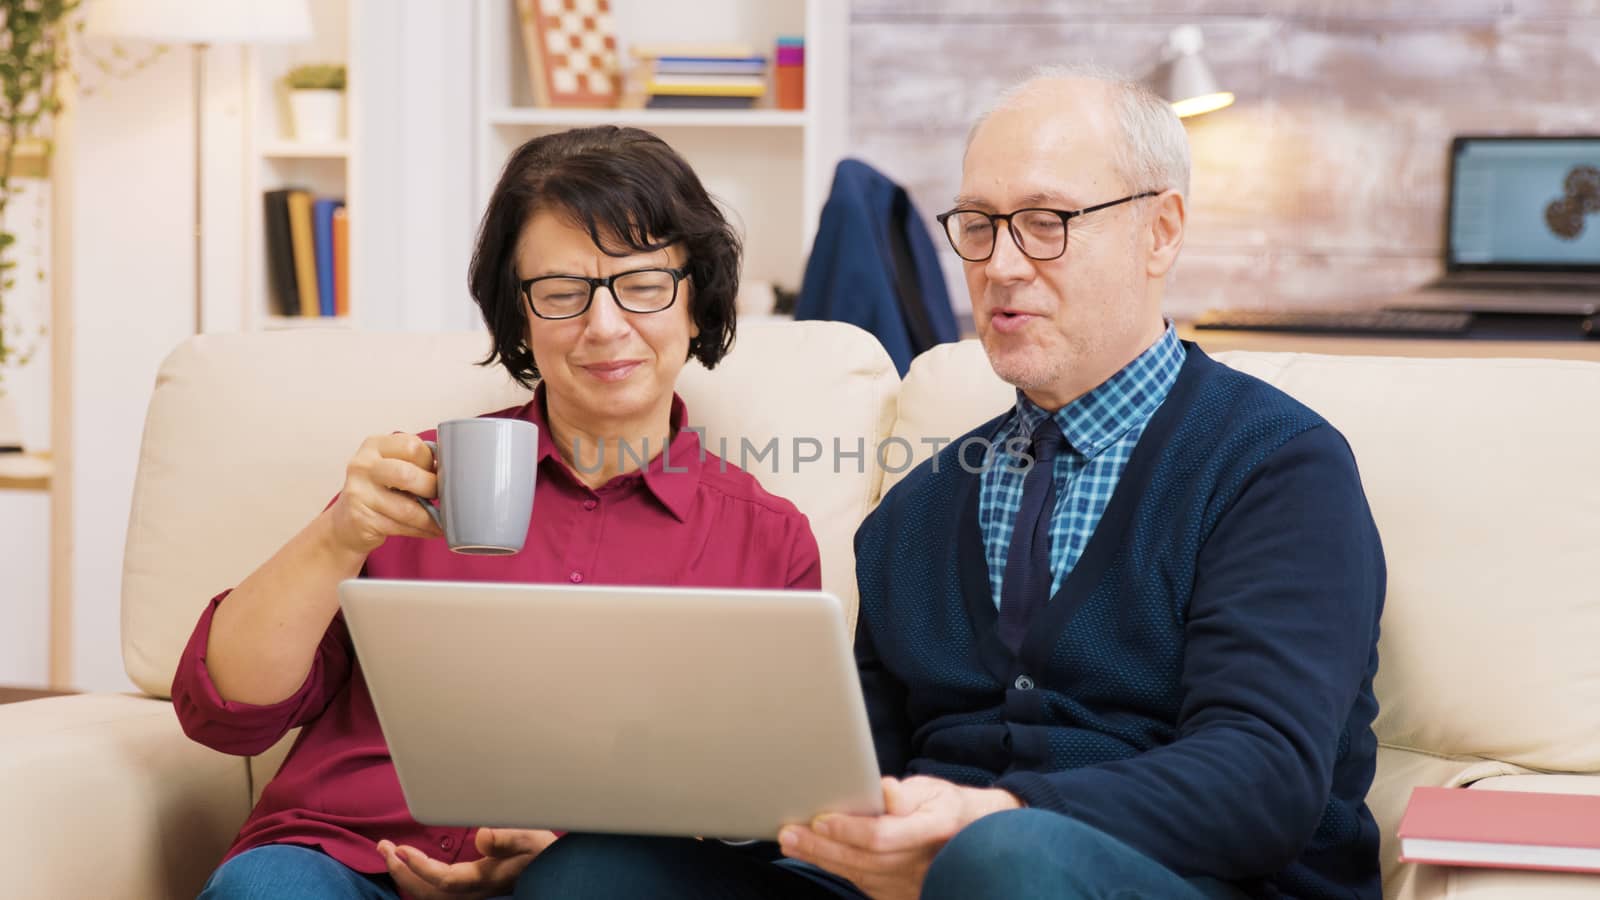 Elderly age couple sitting on sofa holding laptop during a video call. Couple waving at laptop.